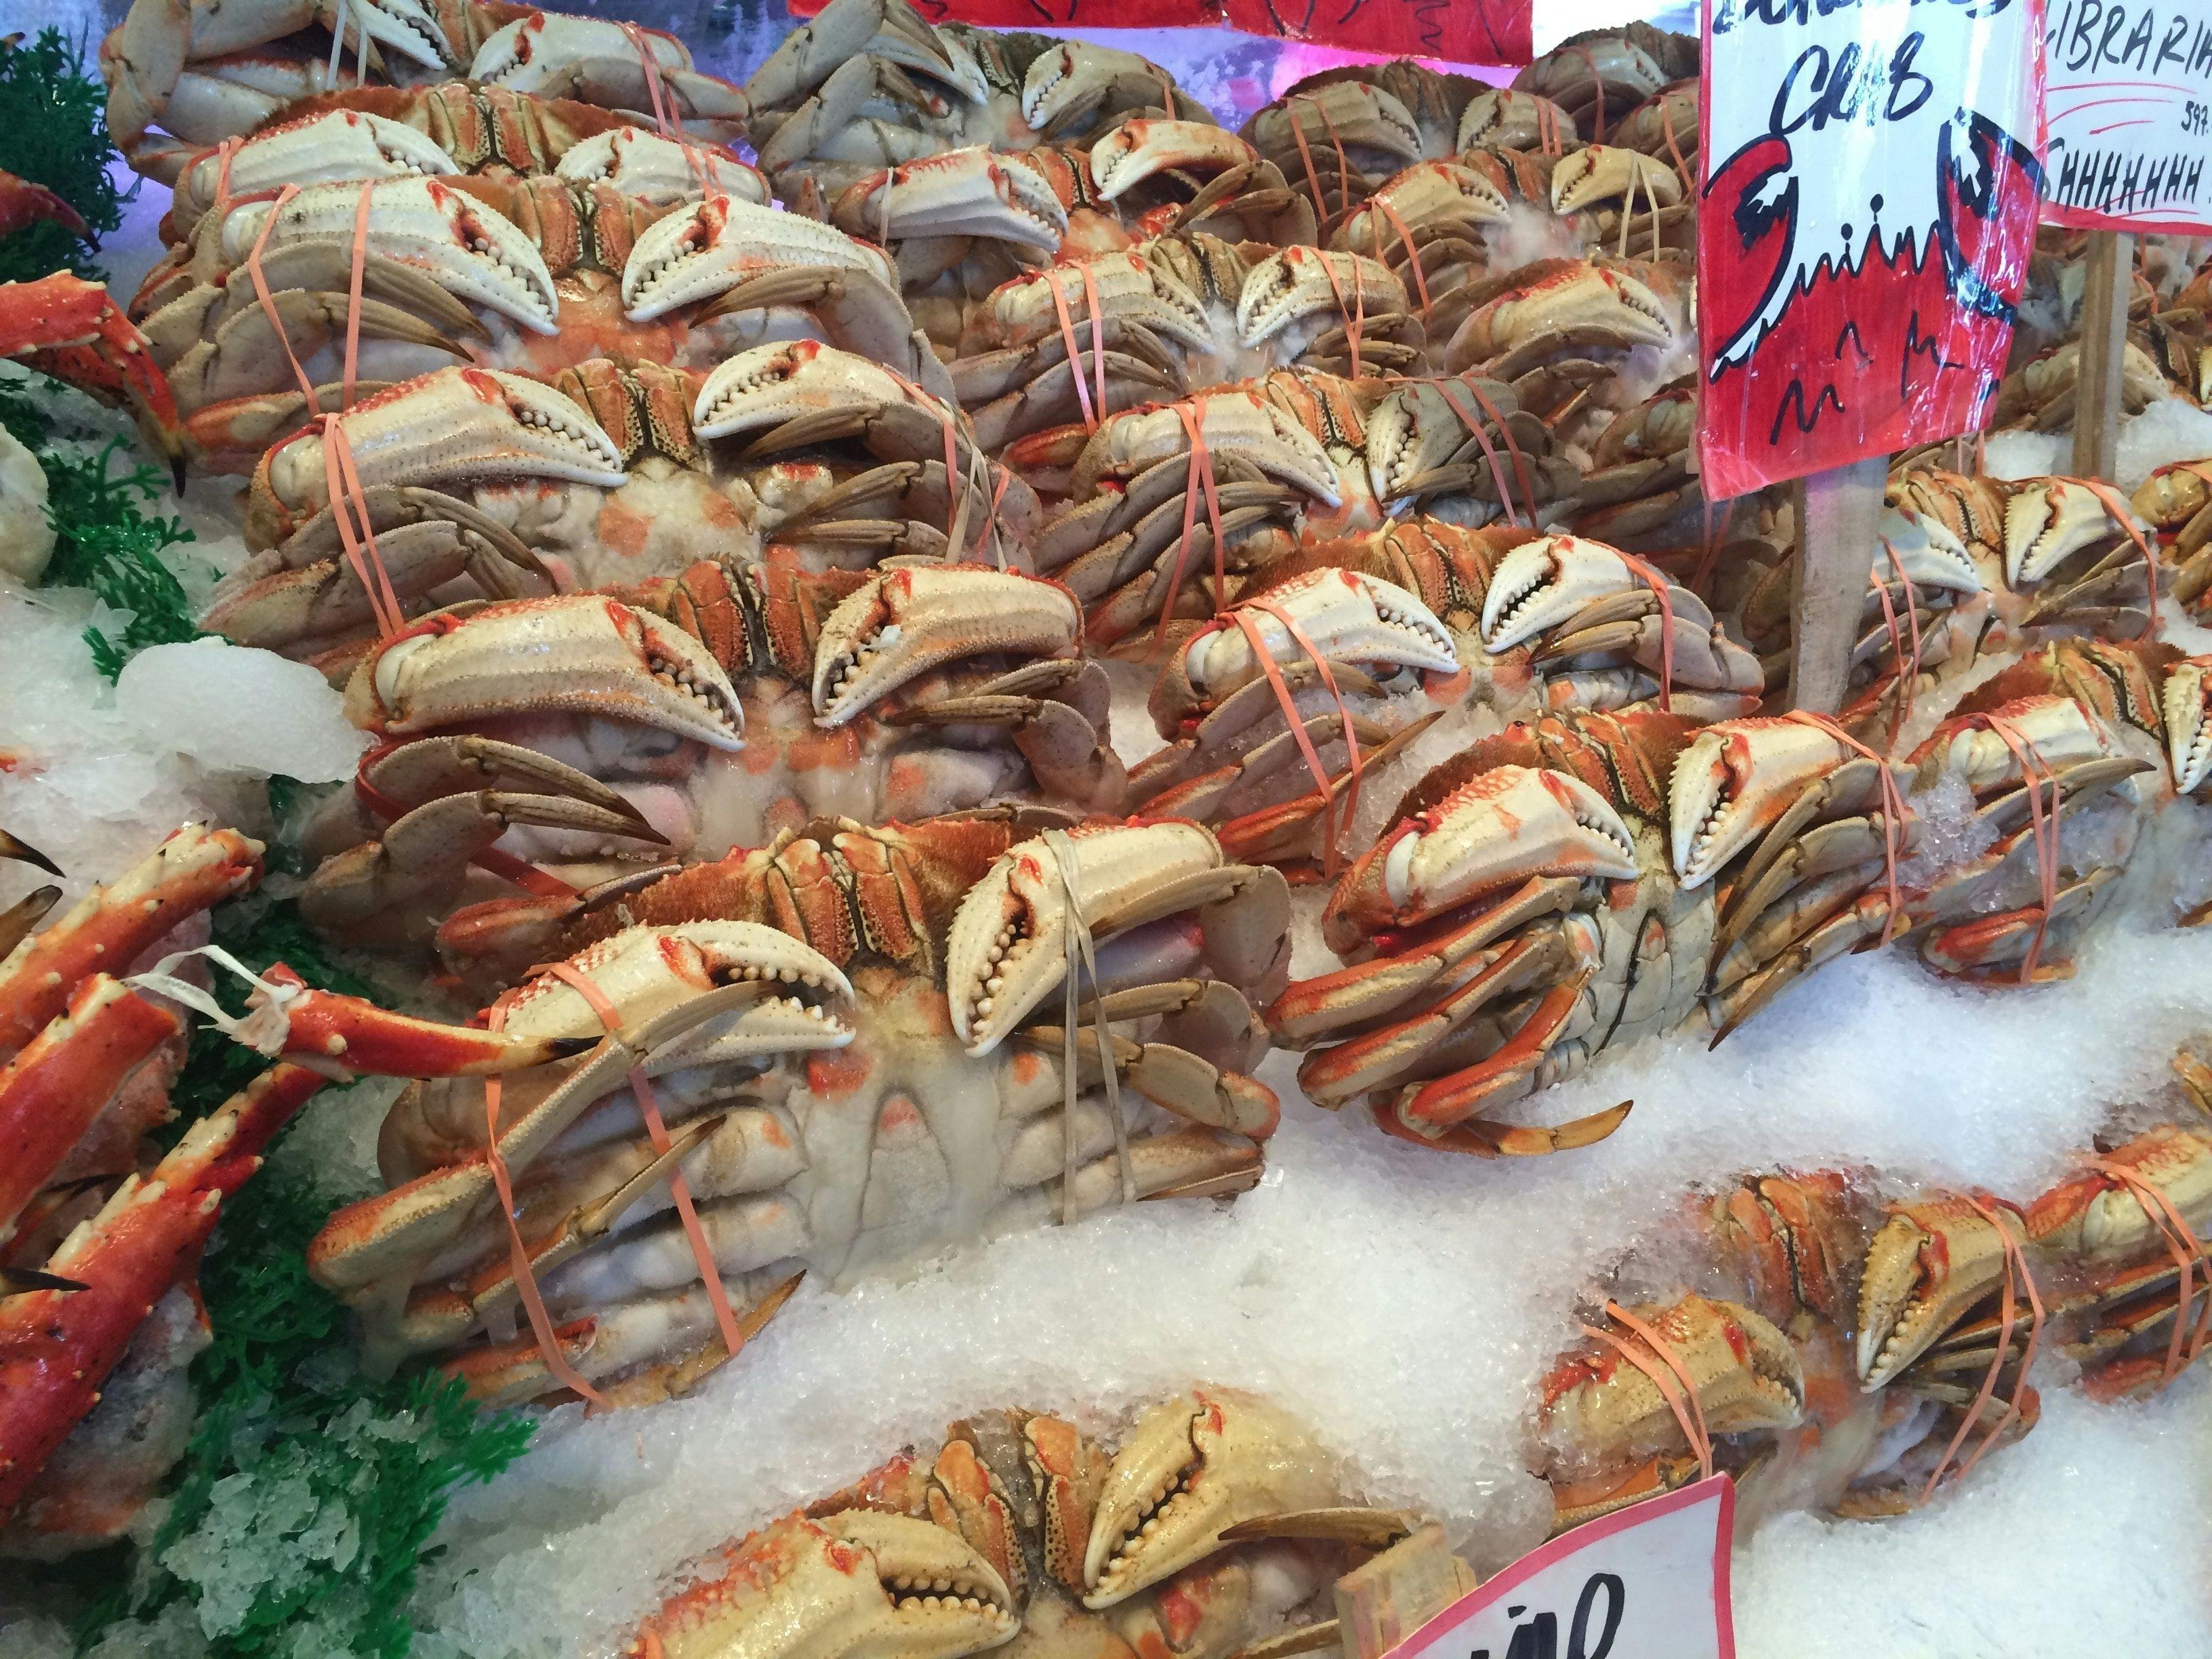 Crabs for sale in Seattle.